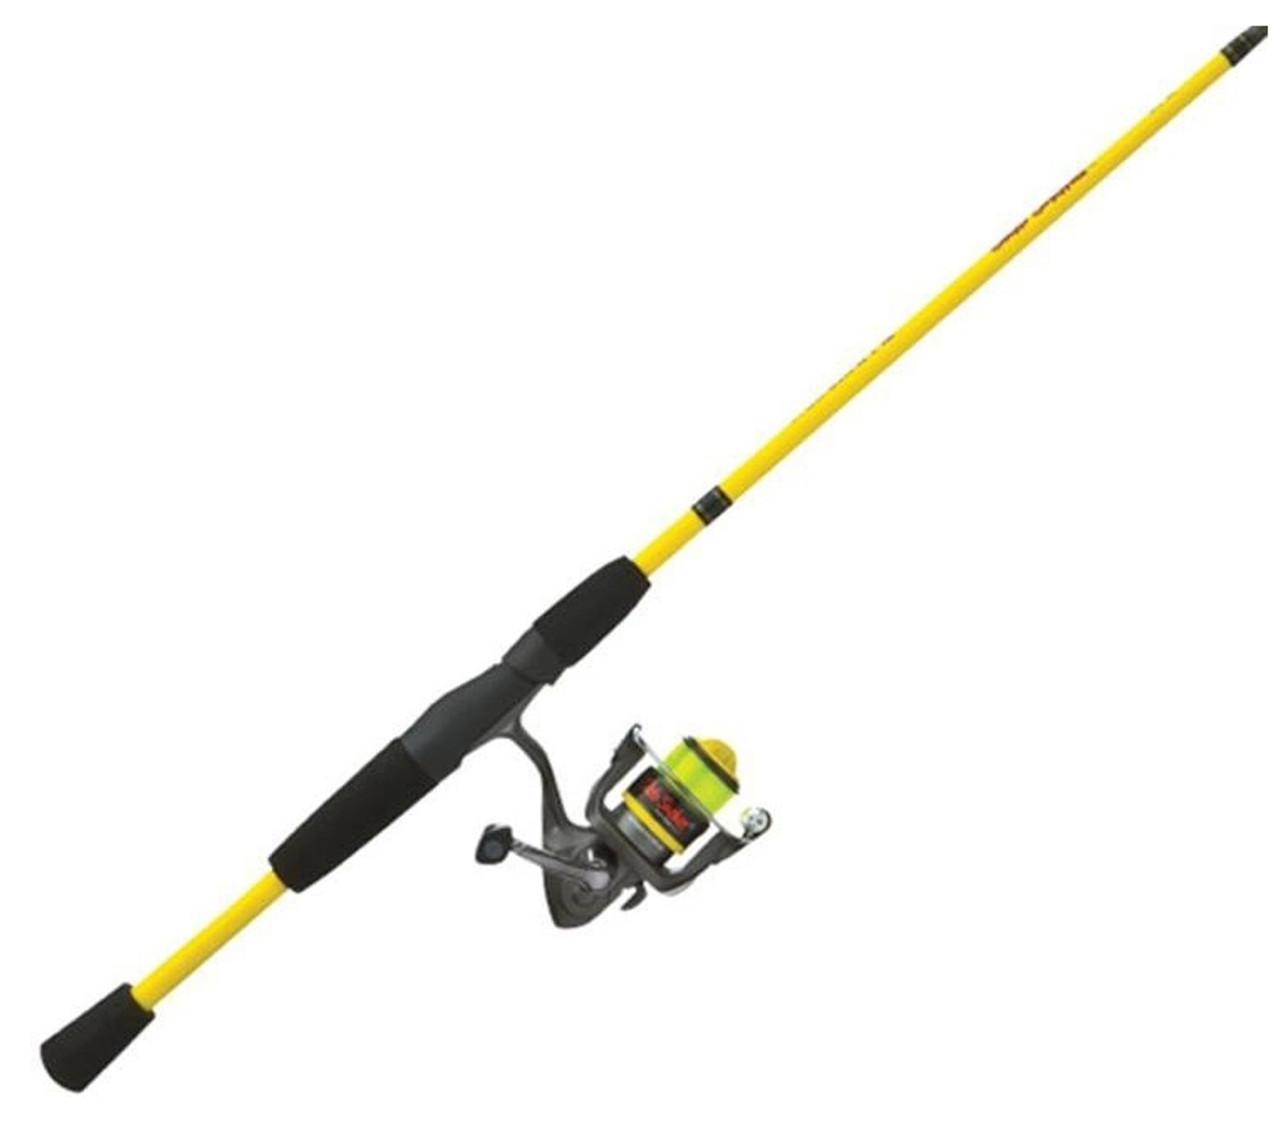 Lew's Mr. Crappie Slab Shaker 5'2 2-Piece Fishing Rod/Spinning Reel Combo  #SS7552-2